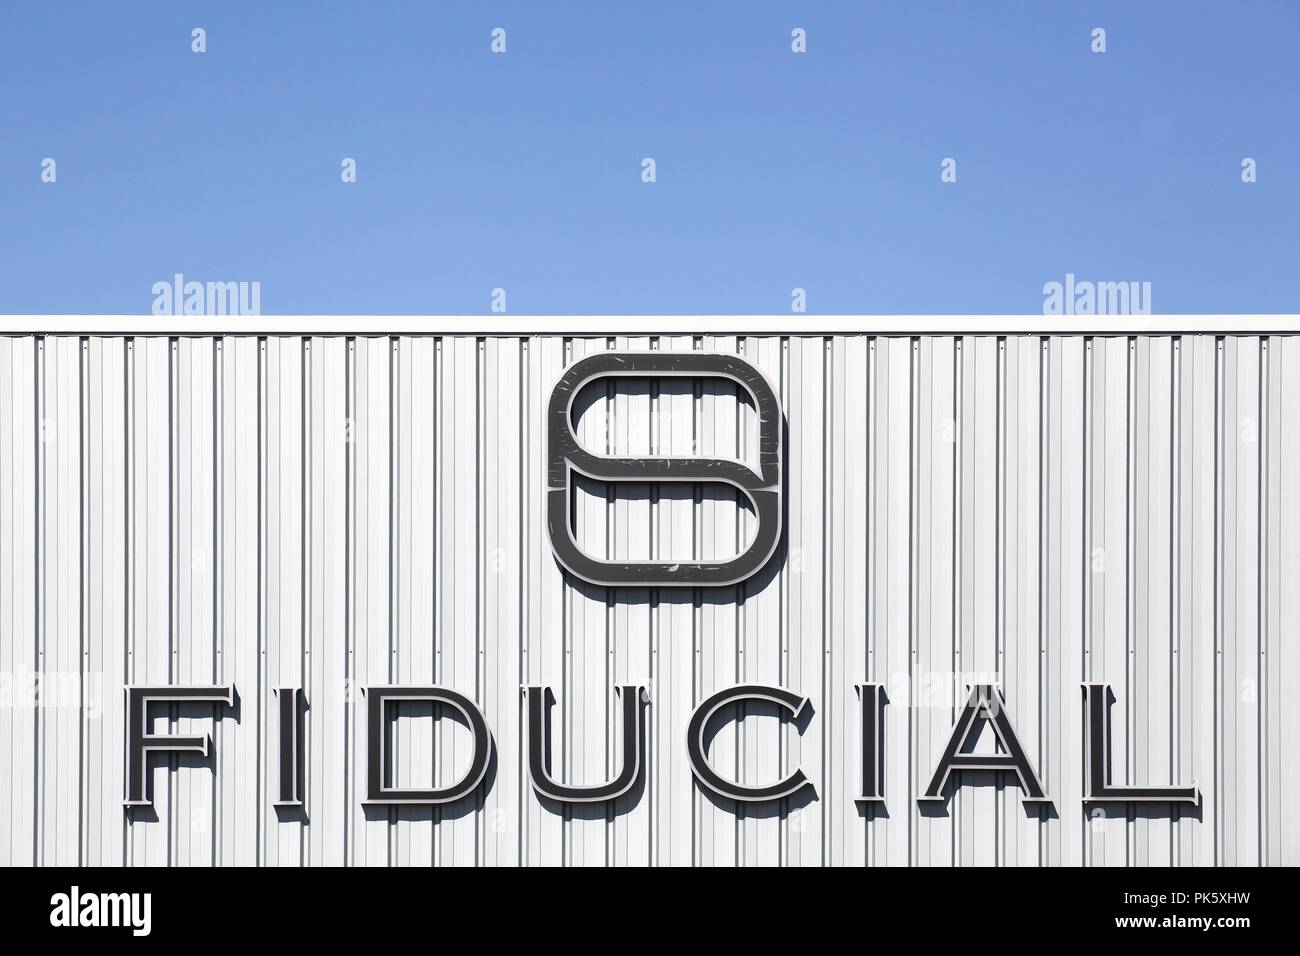 Saint Priest, France - September 8, 2018: Fiducial logo on a wall. Fiducial is a French company and the leading provider of multidisciplinary services Stock Photo